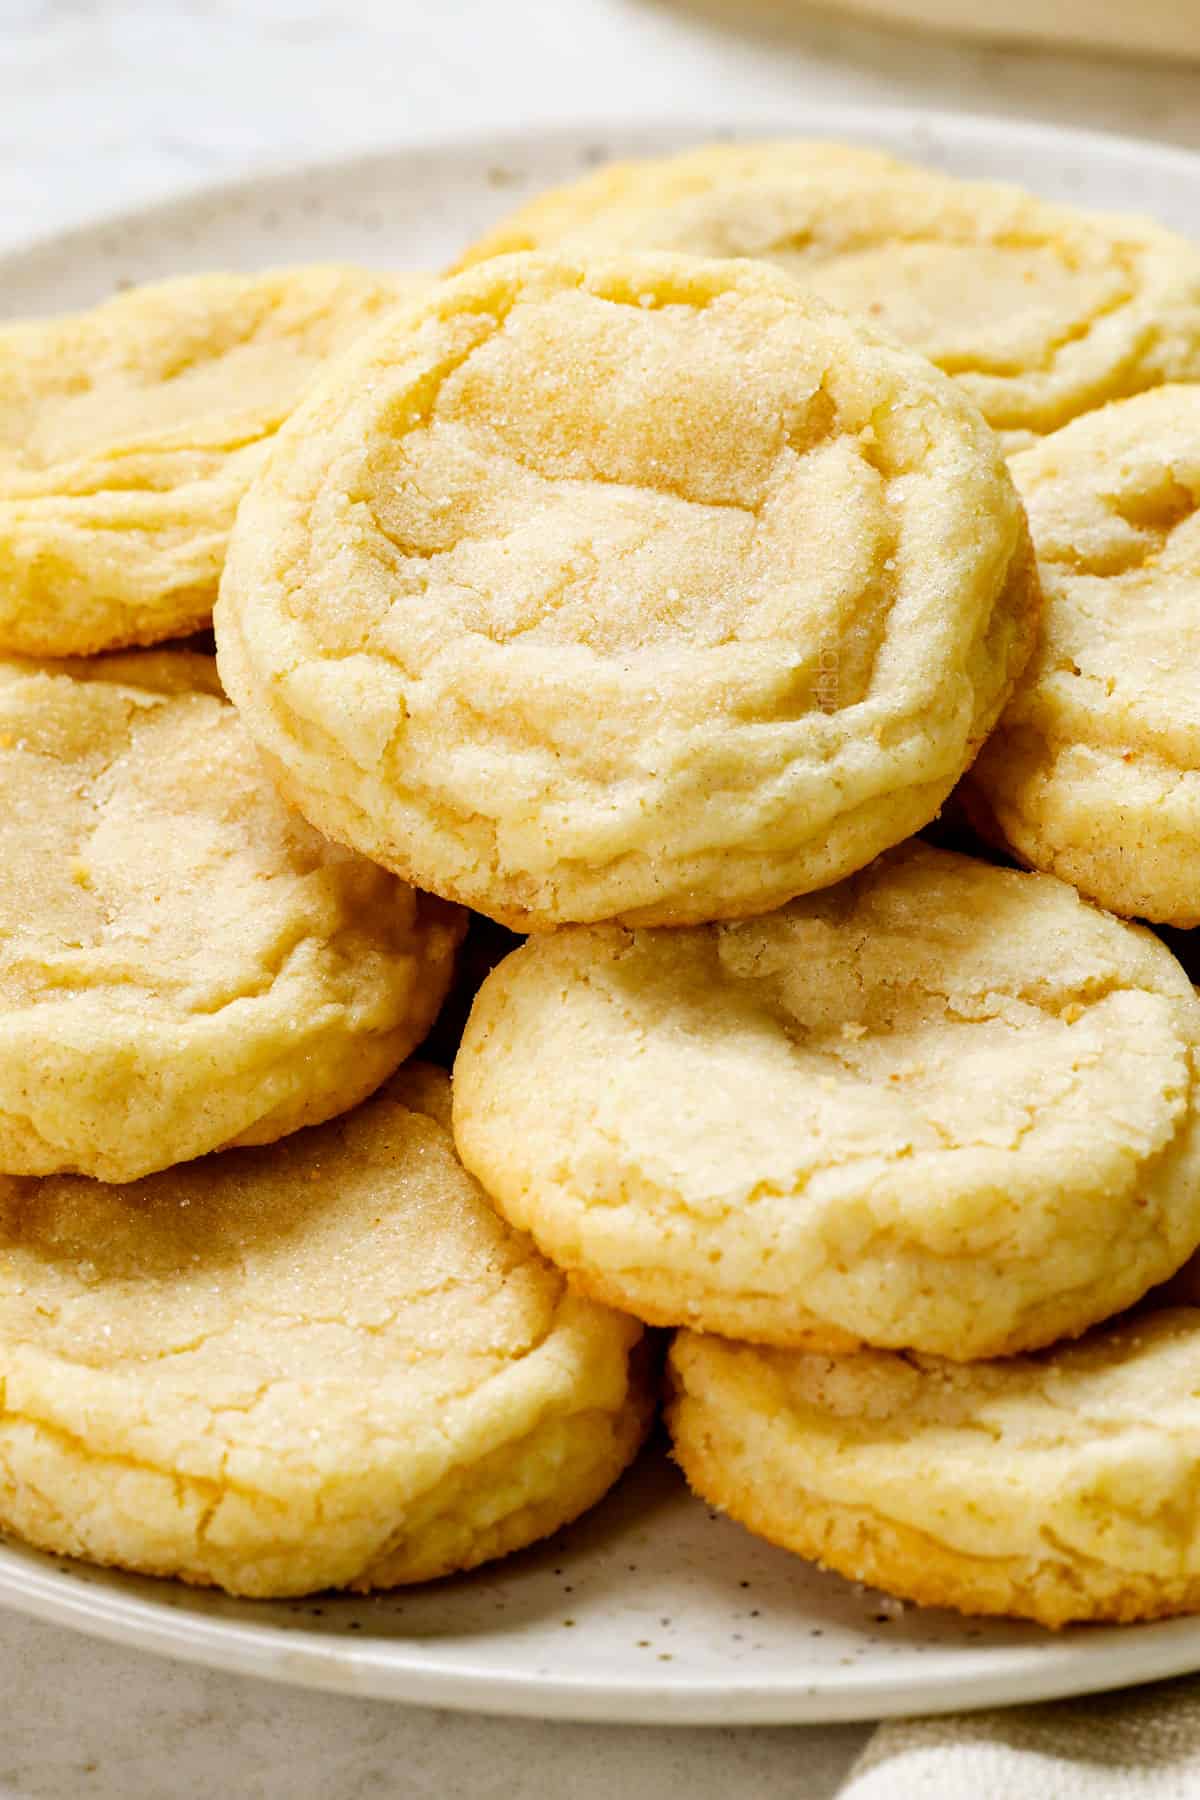 a plate of best sugar cookie recipe showing how thick, soft and chewy they are